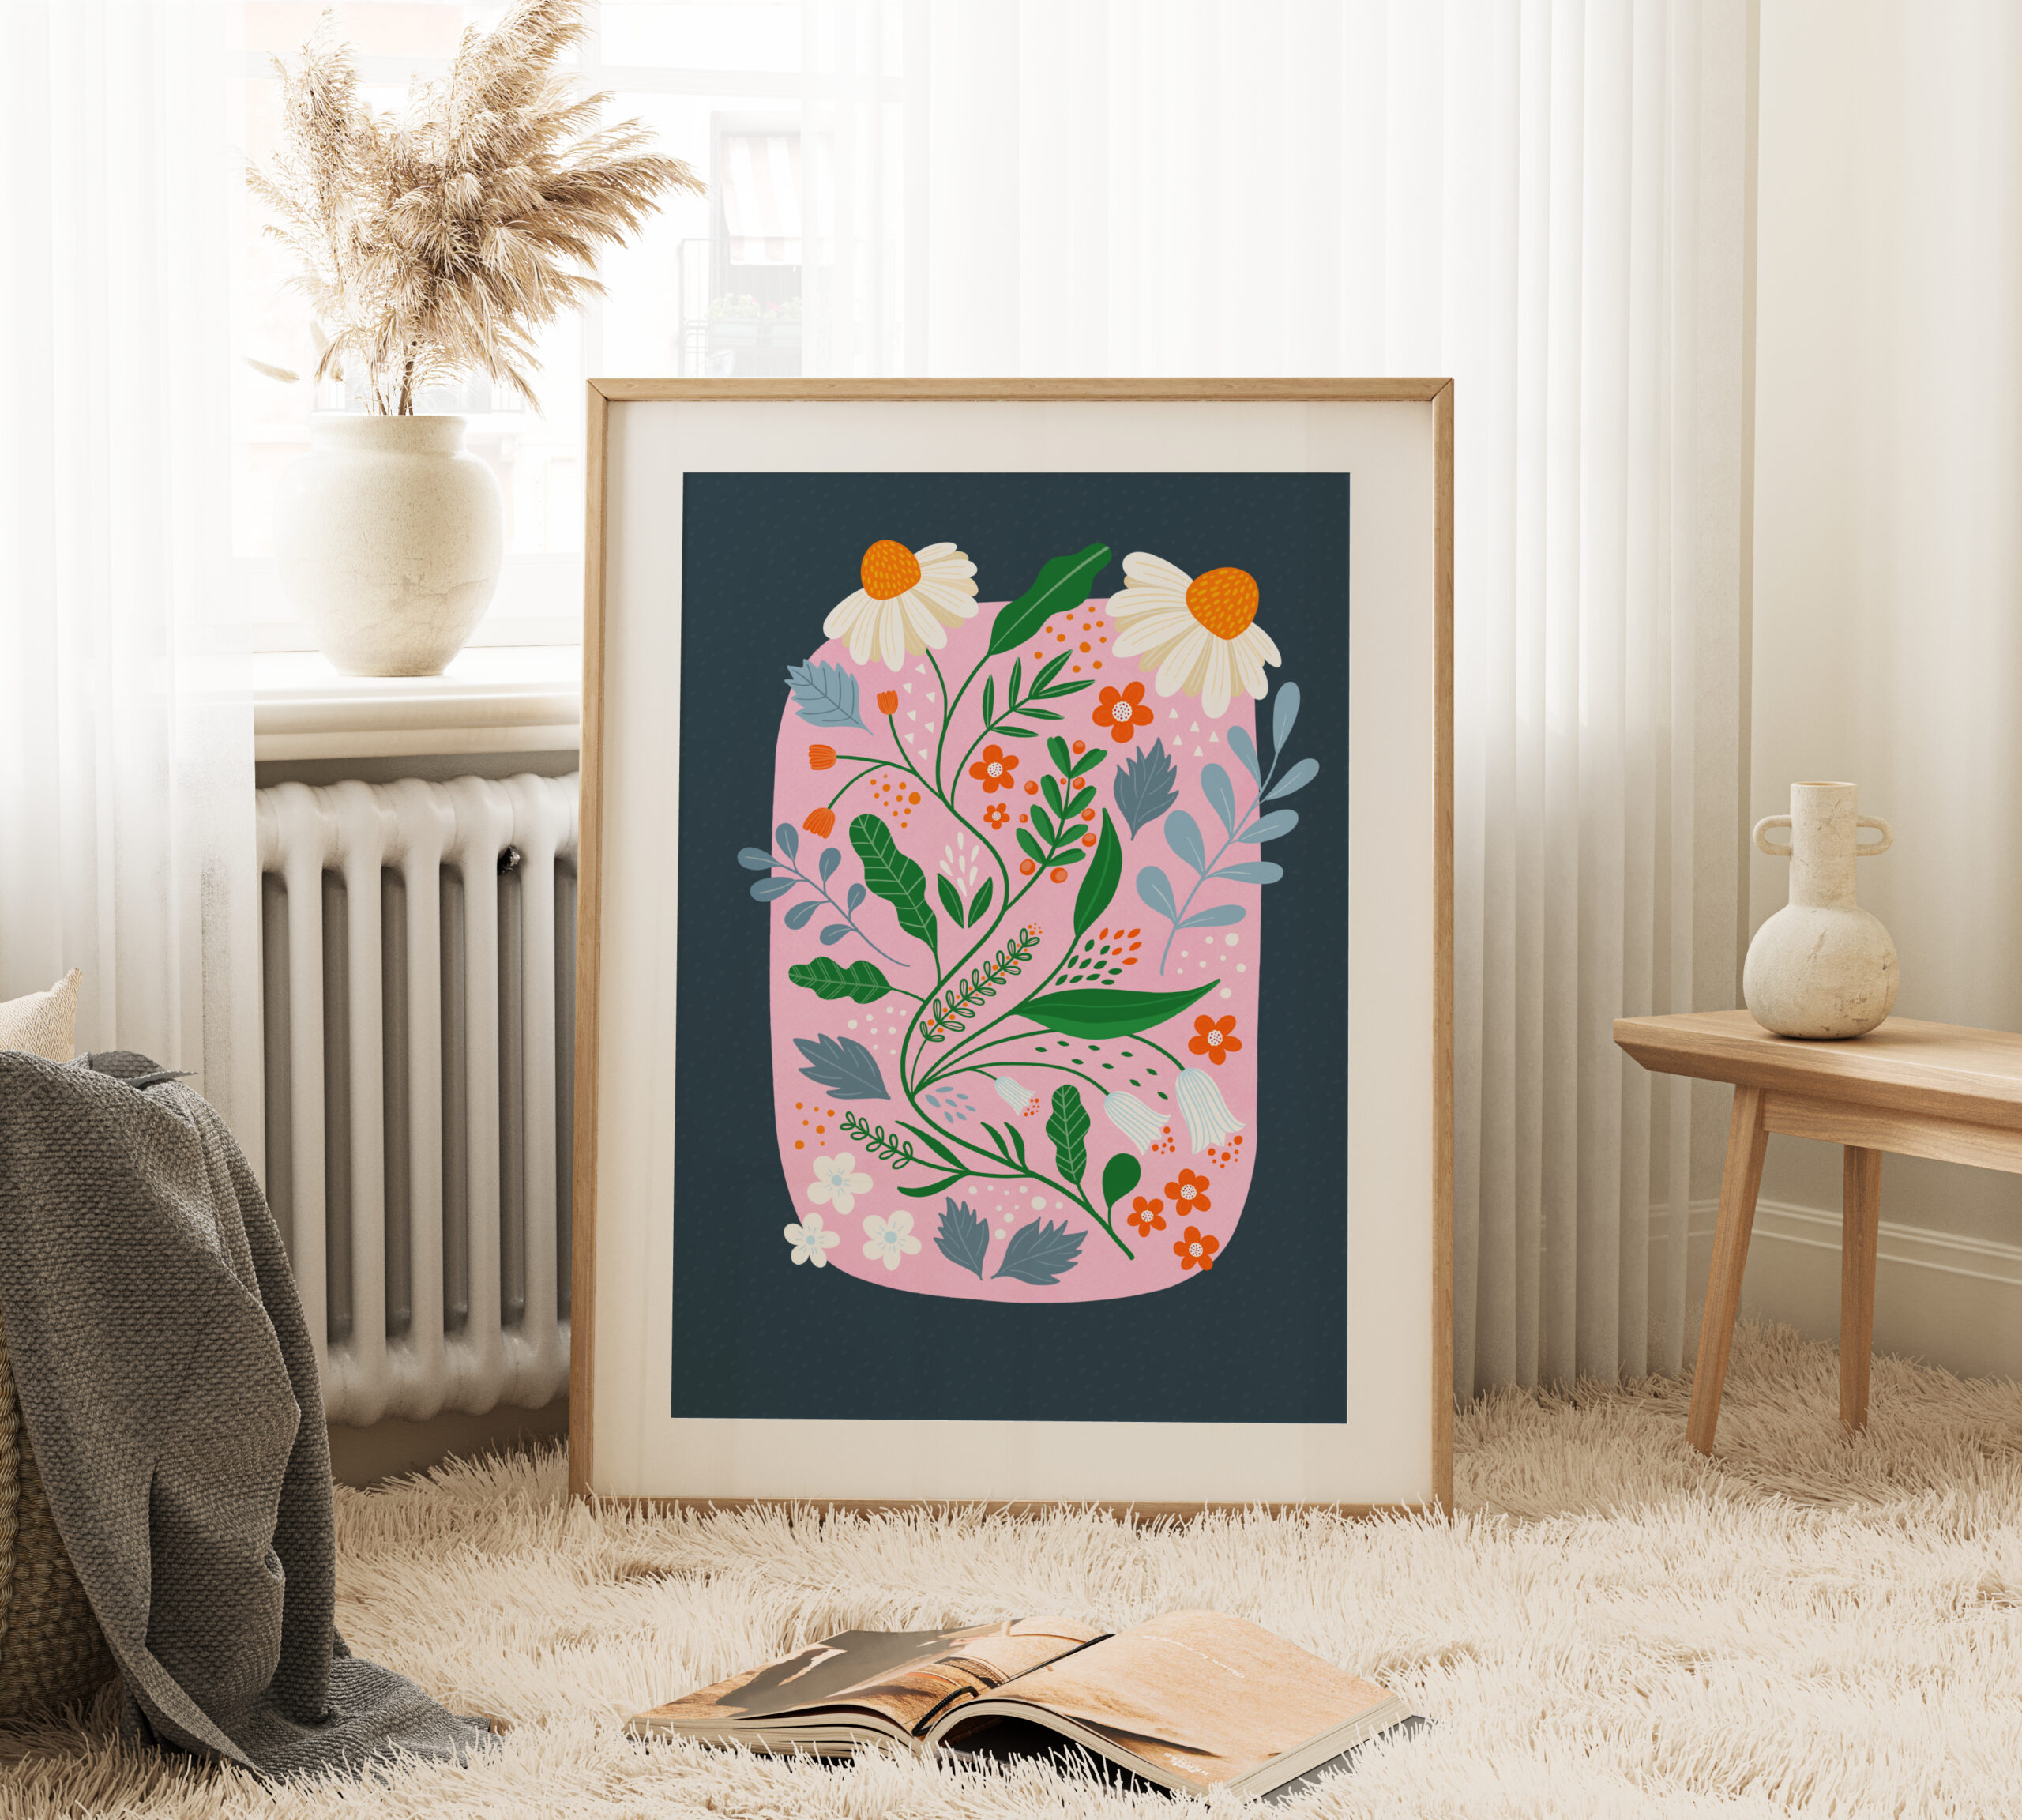 Daisies - An Art Print by Fleur & Mimi, illustrated by Bea van der Zwaag and printed in Ireland.